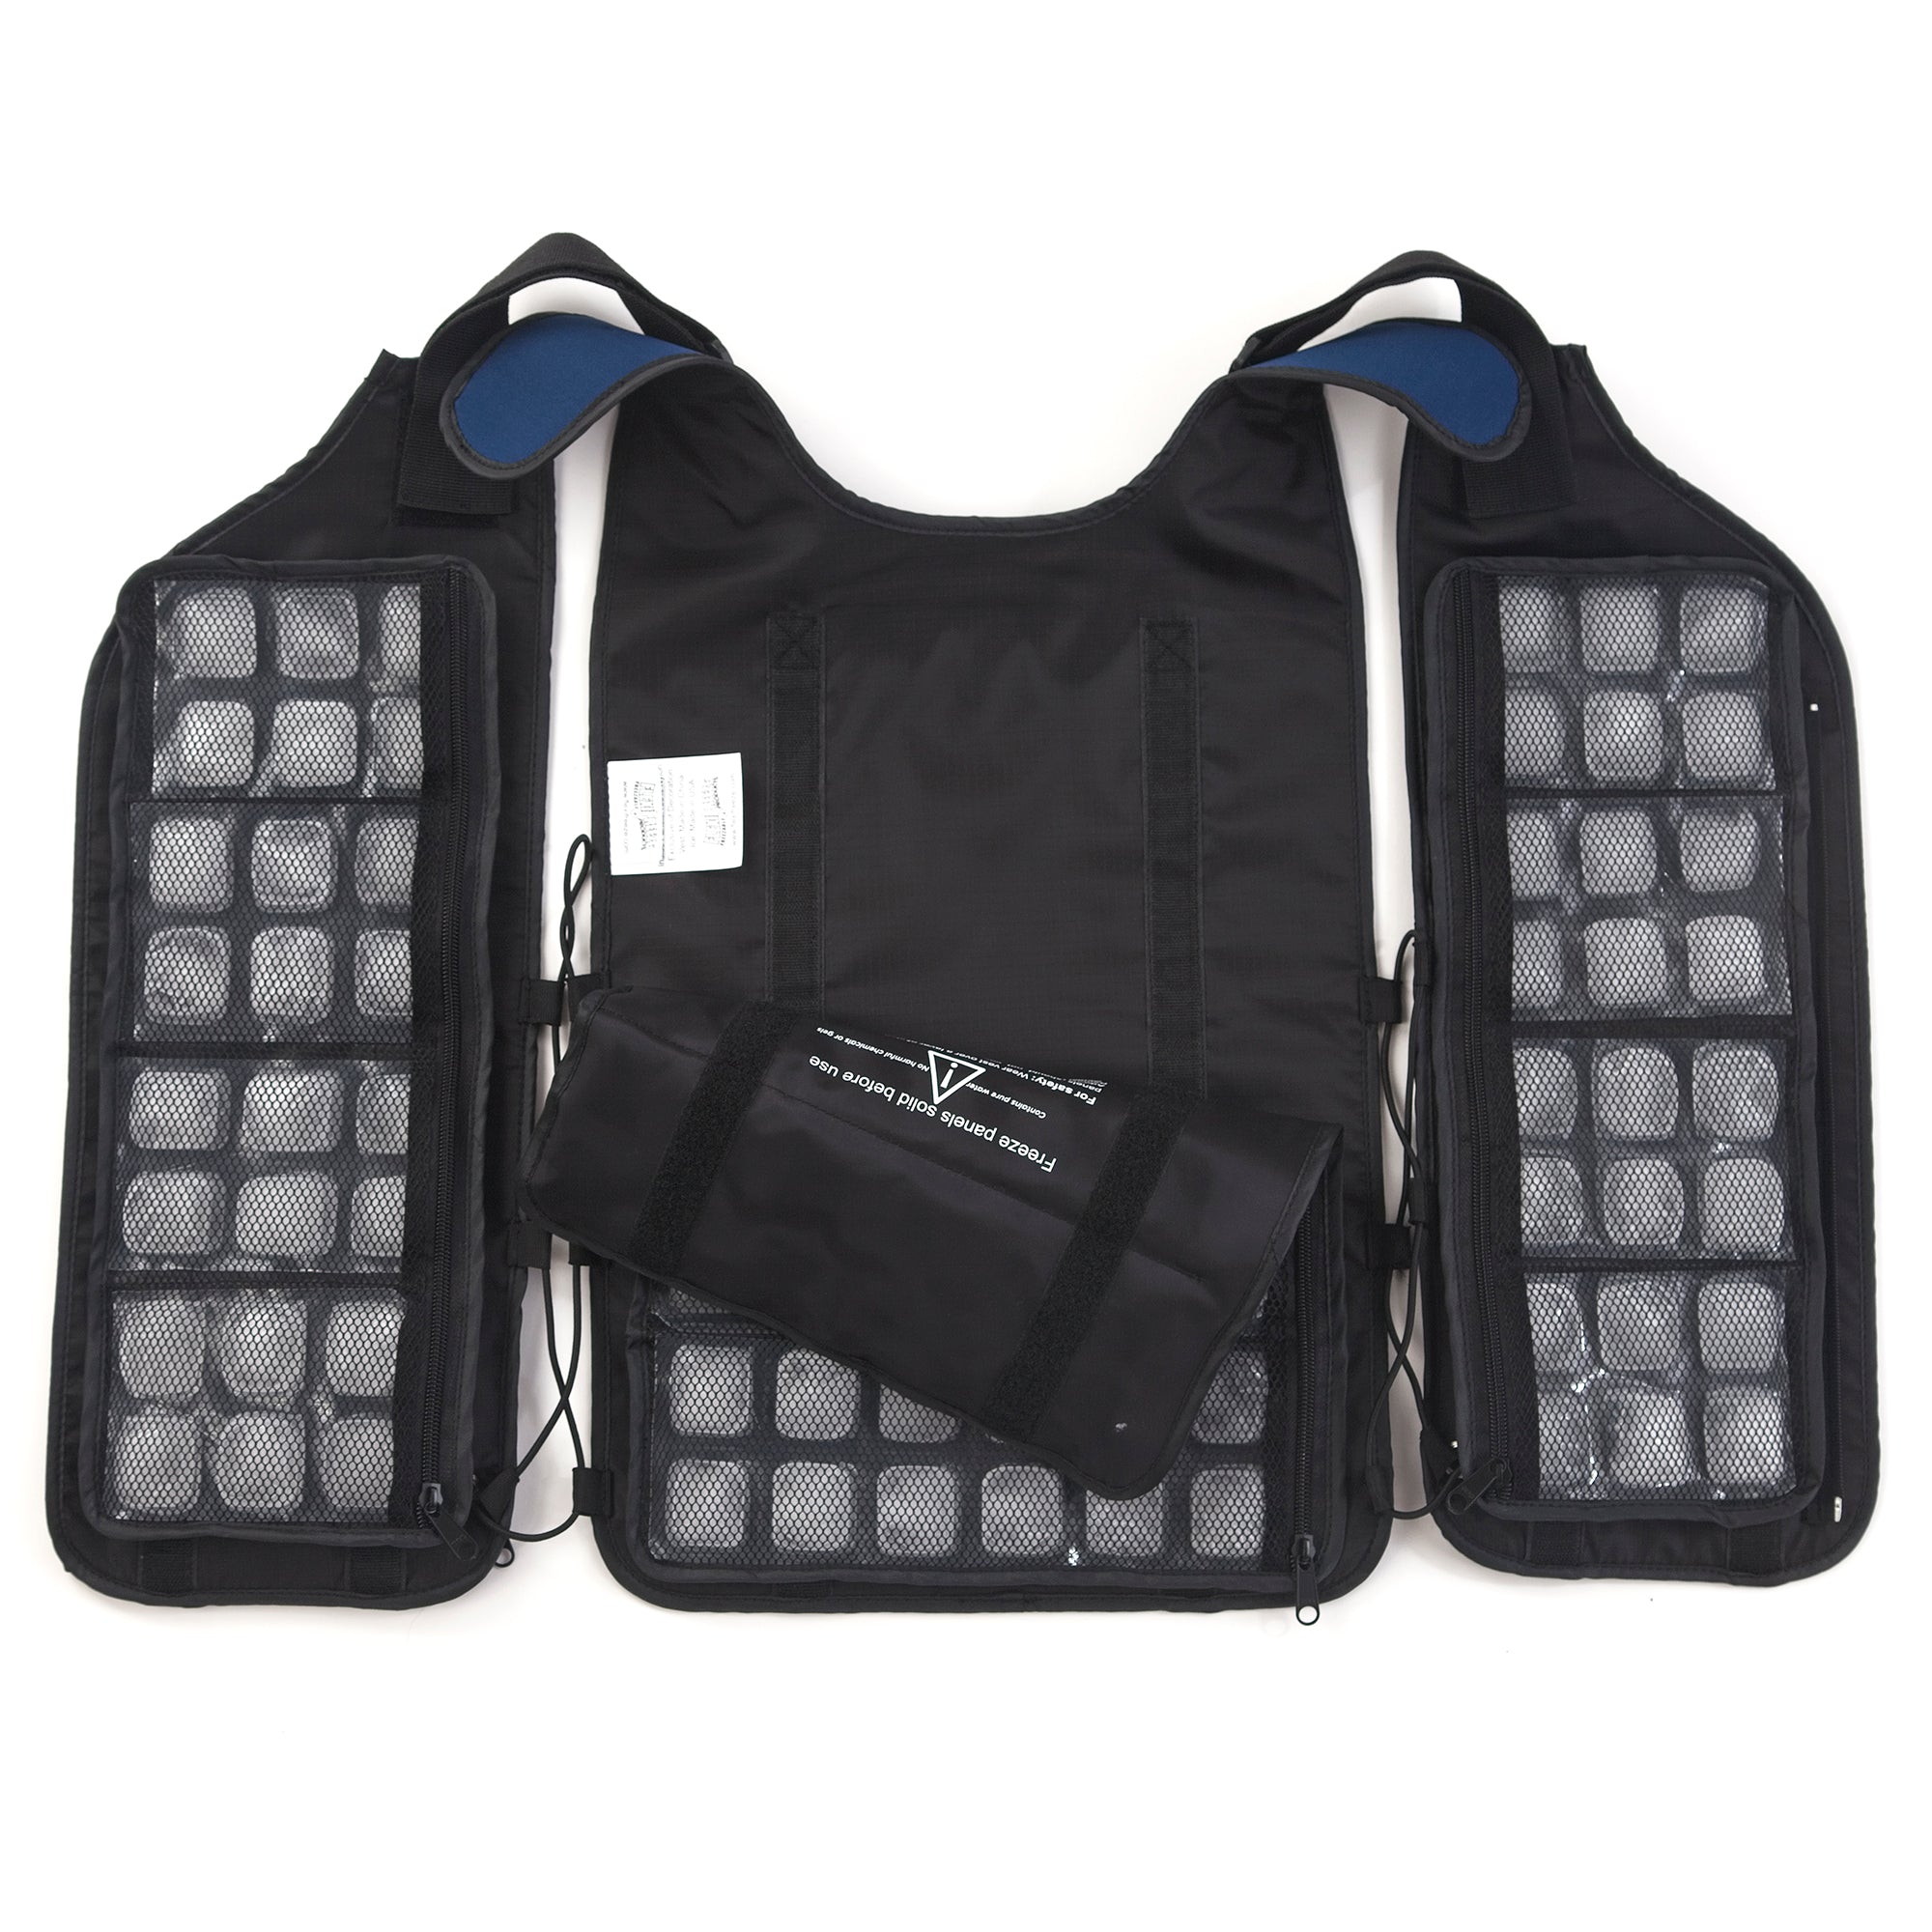 Open FlexiFreeze personal cooling vest, with refreezable ice panels displayed